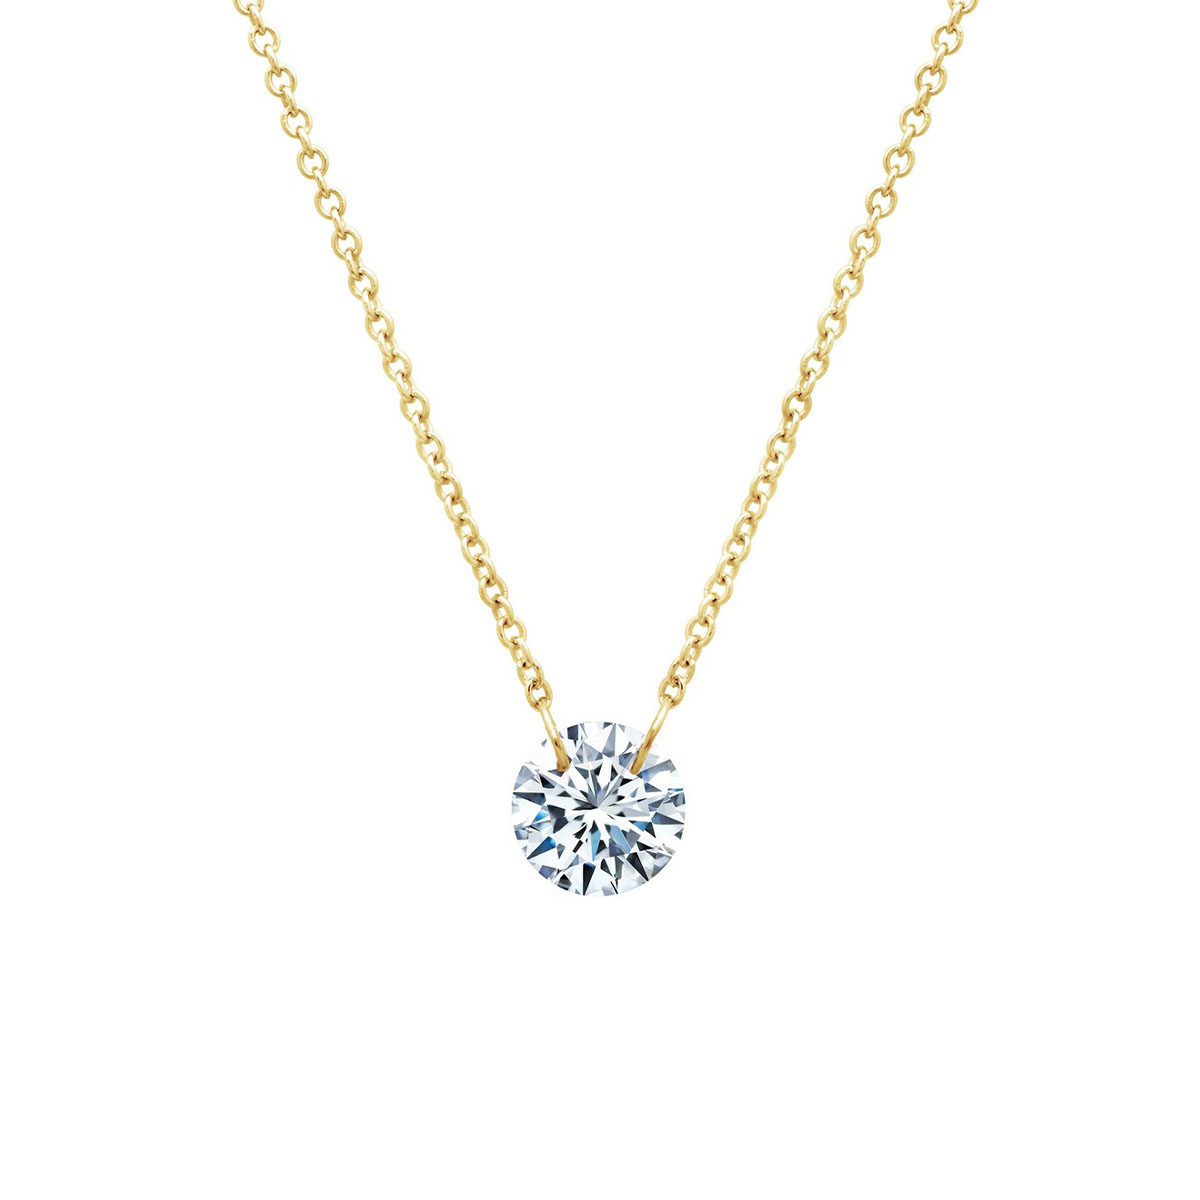 Gold Plated Sterling Silver Cubic Zirconia Necklace